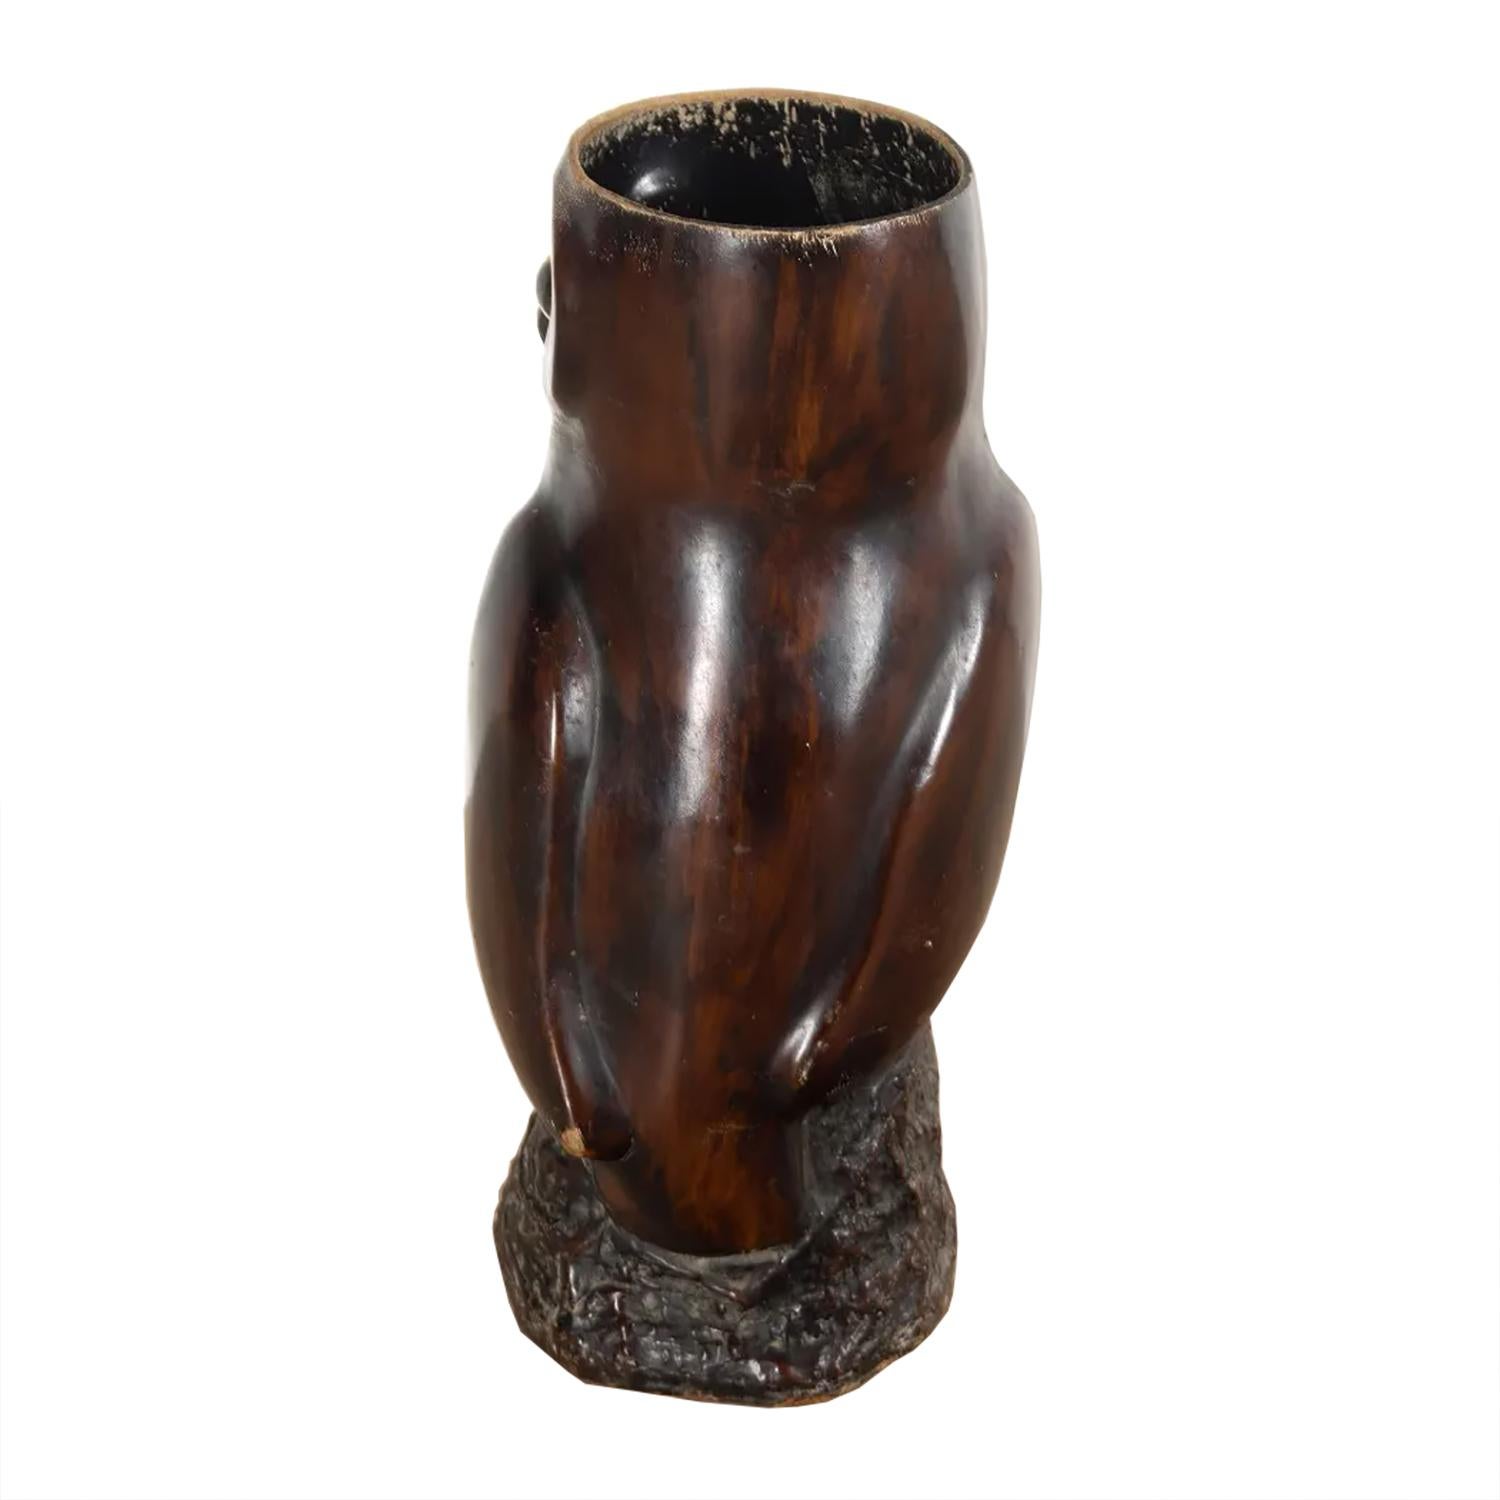 A decorative carved wooden stick stand in the form of an owl with glass eyes. This piece would also make a vase or a decorative display piece.